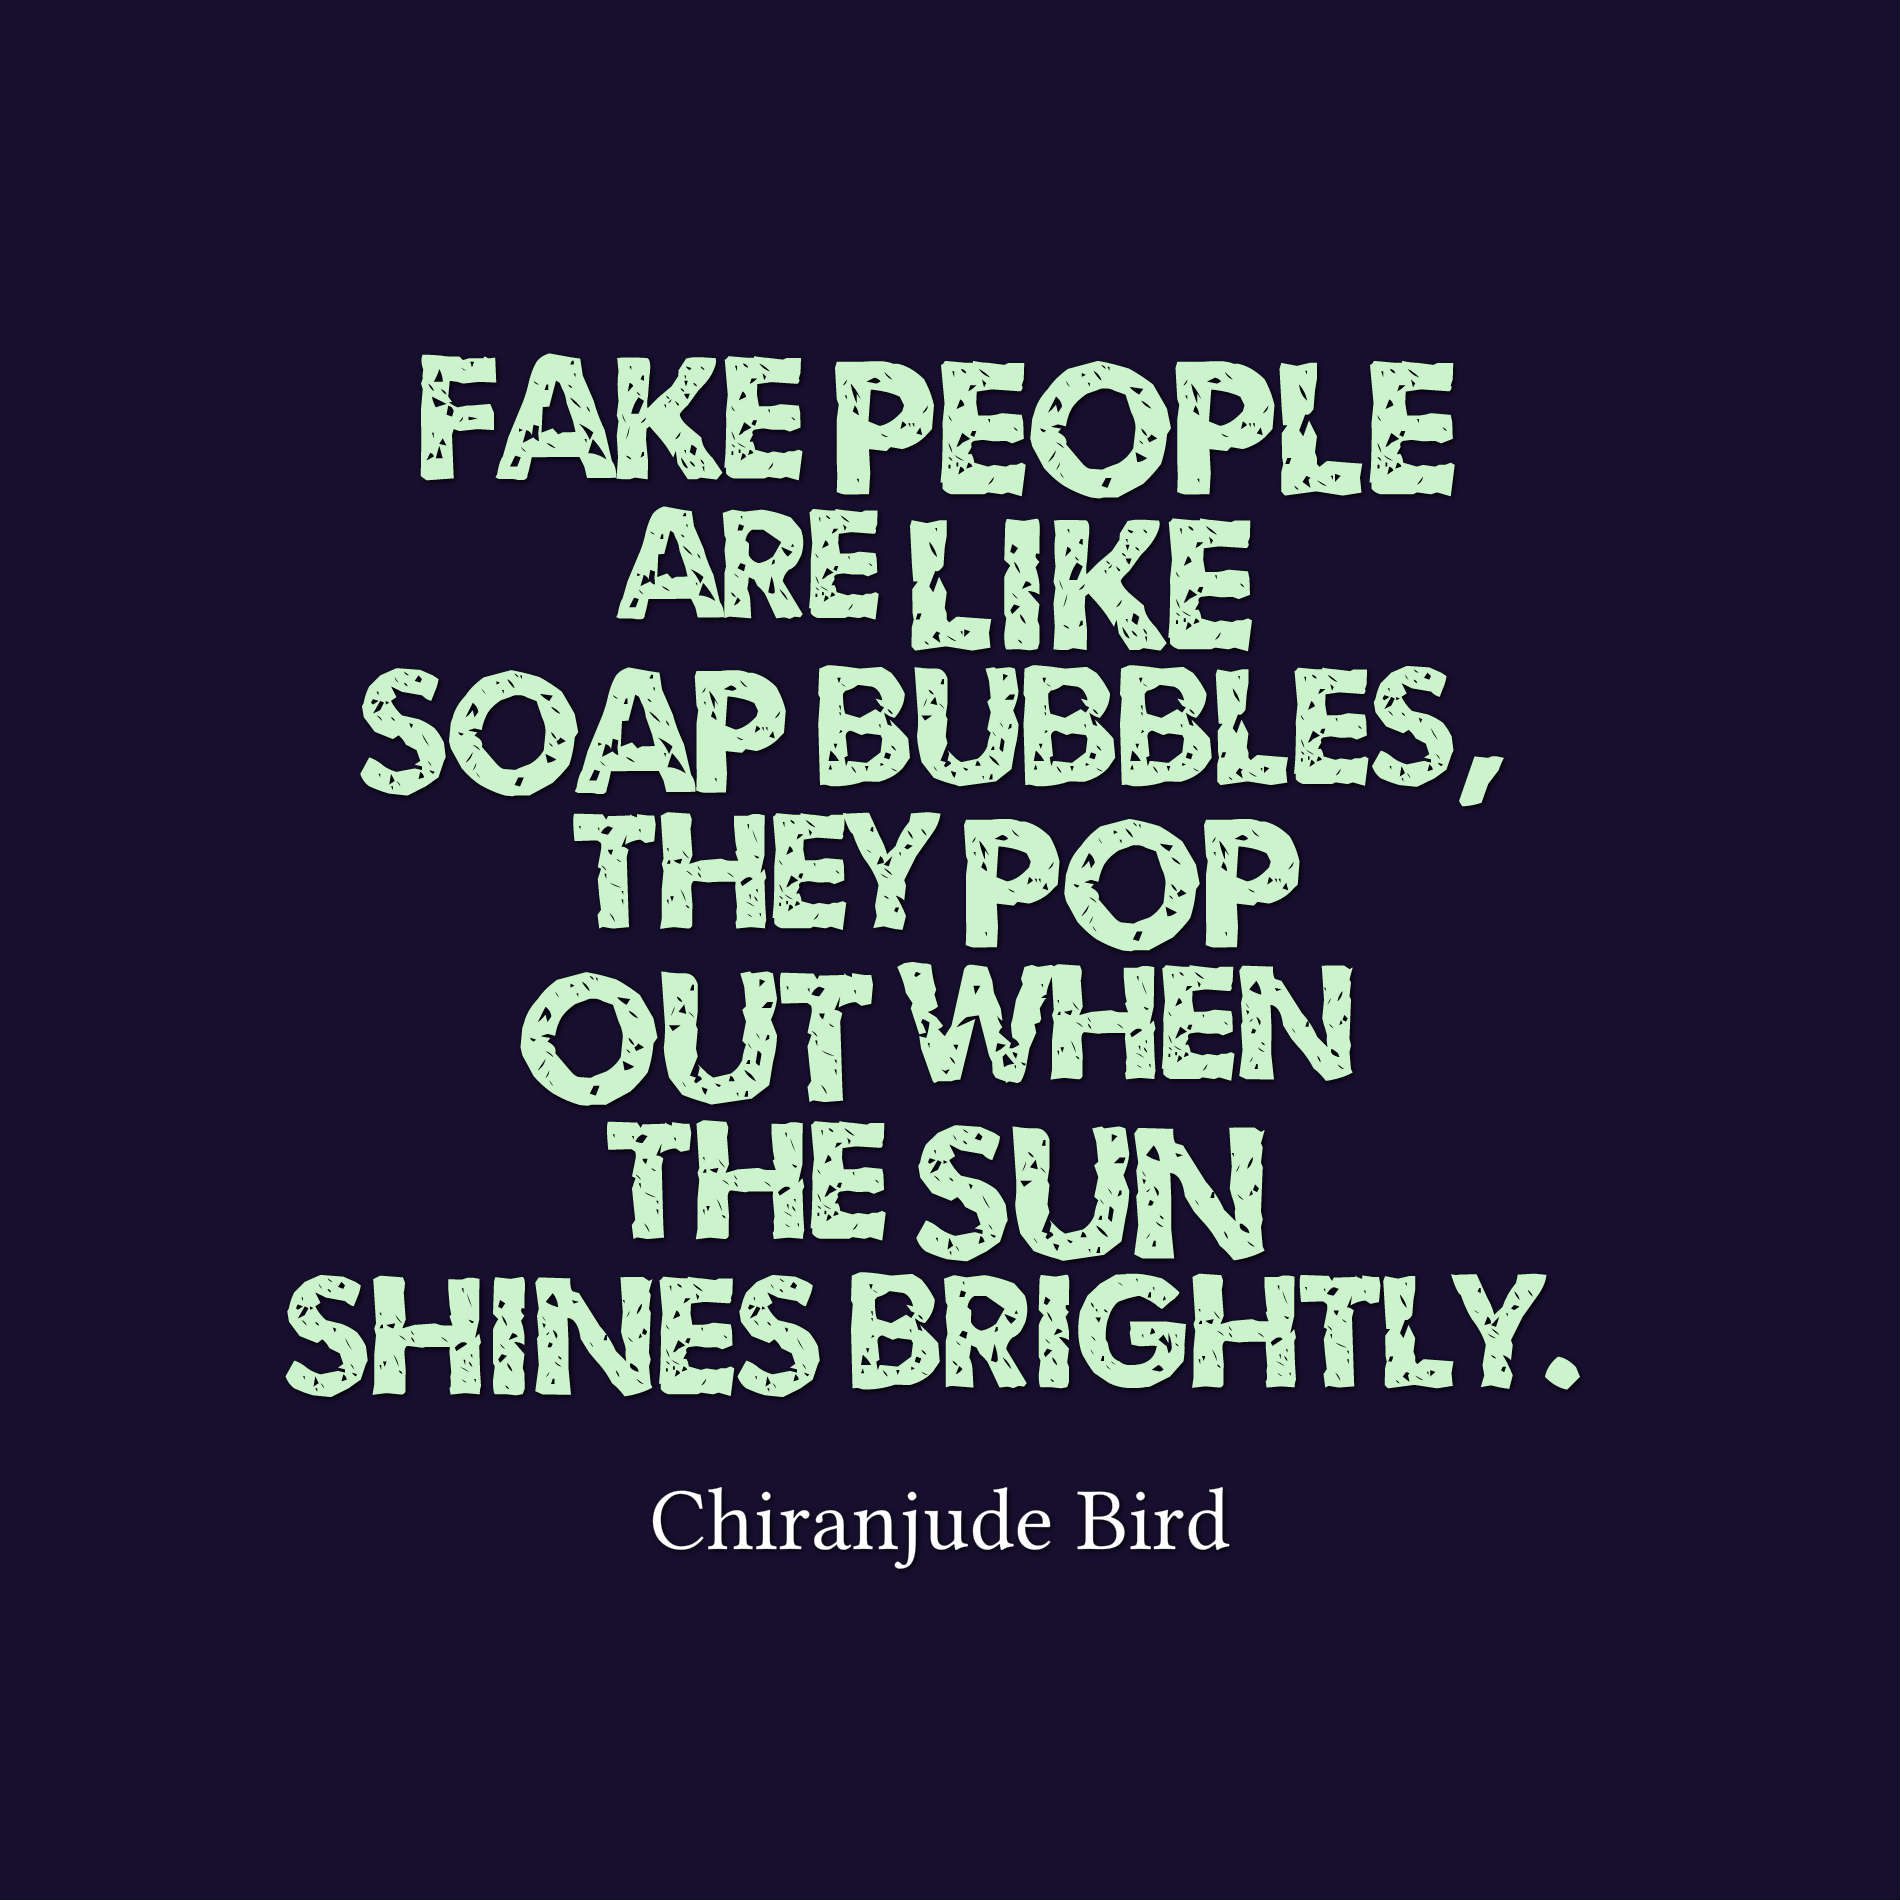 Fake people are like soap bubbles, they pop out when the sun shines brightly.